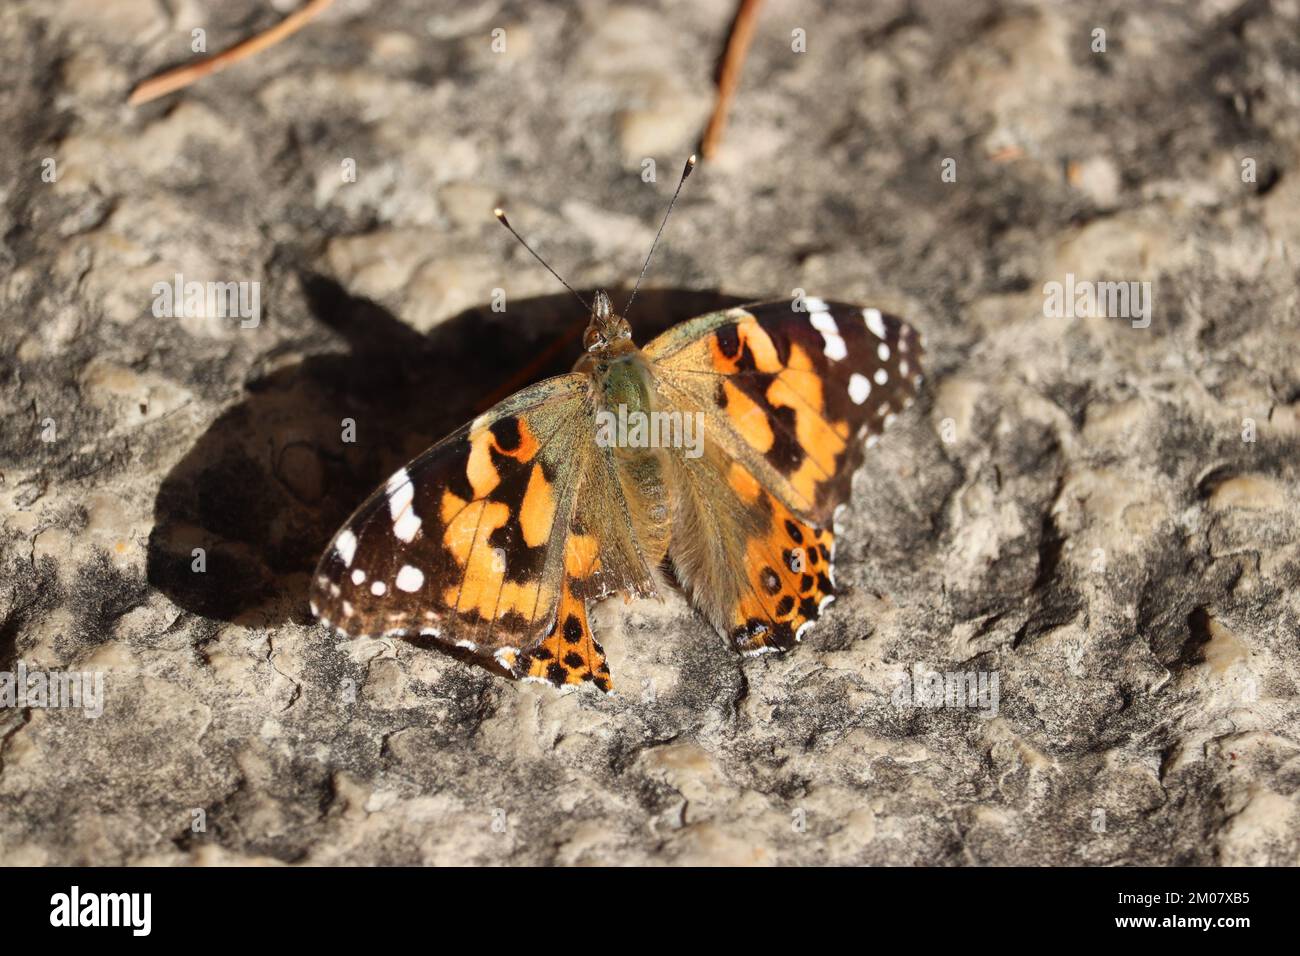 A top view of adorable Painted lady butterfly on a rock Stock Photo